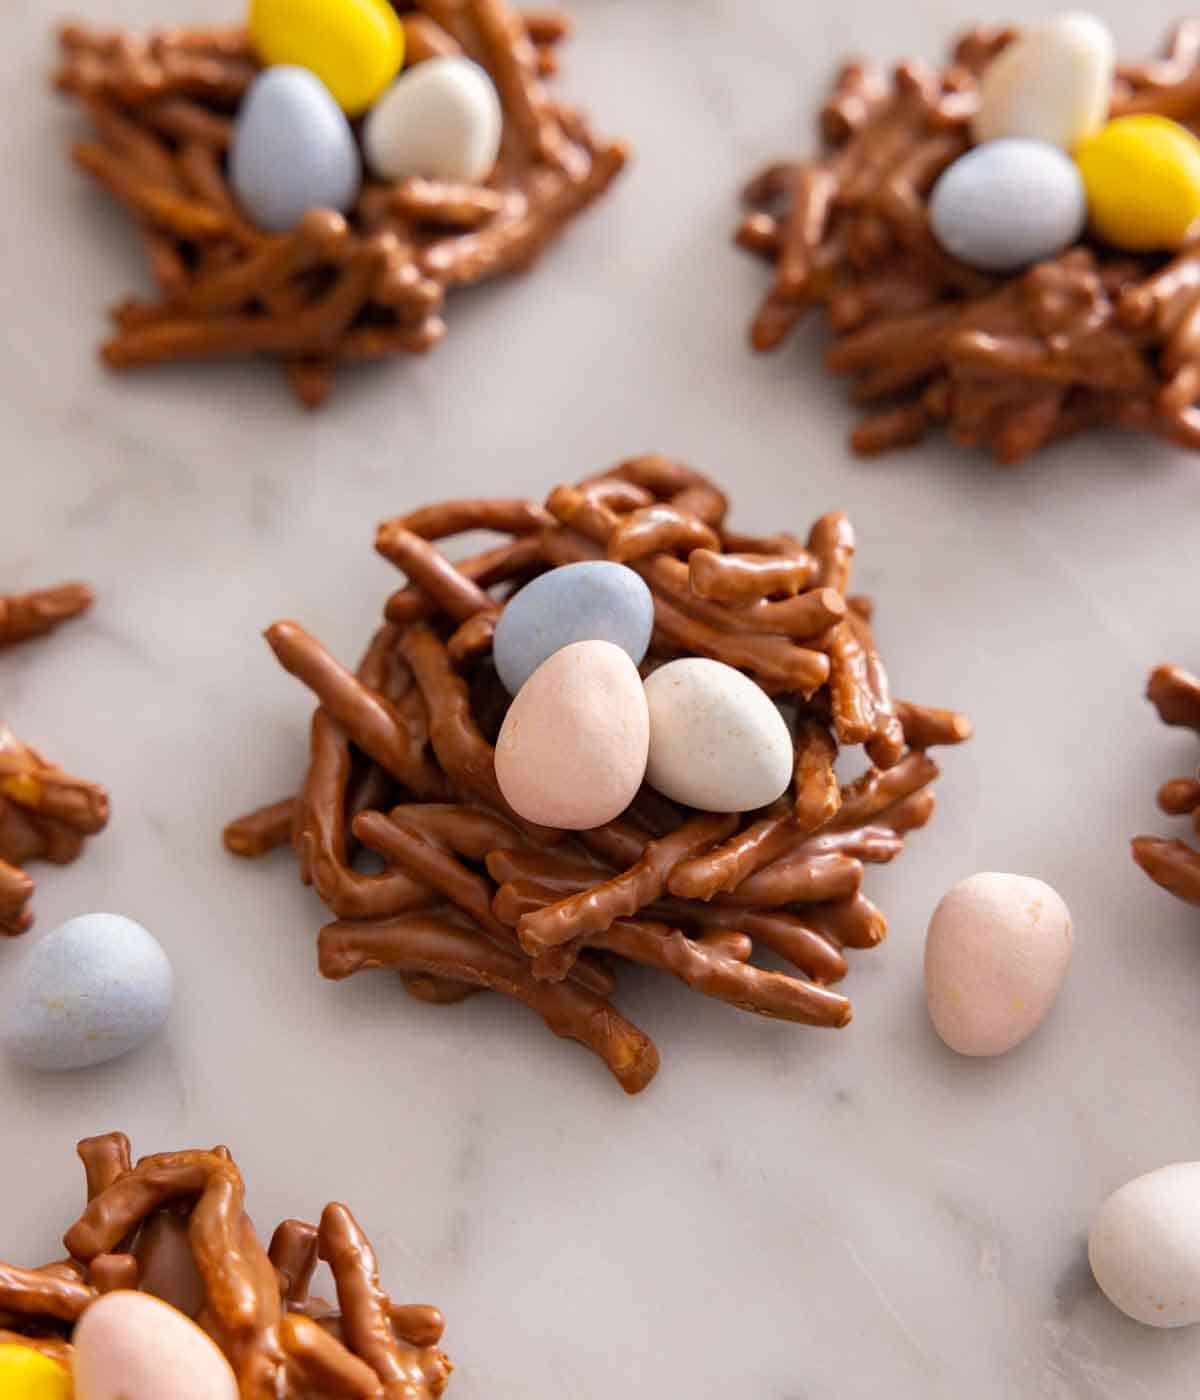 Multiple birds nest cookies with one in focus with candy eggs scattered around.